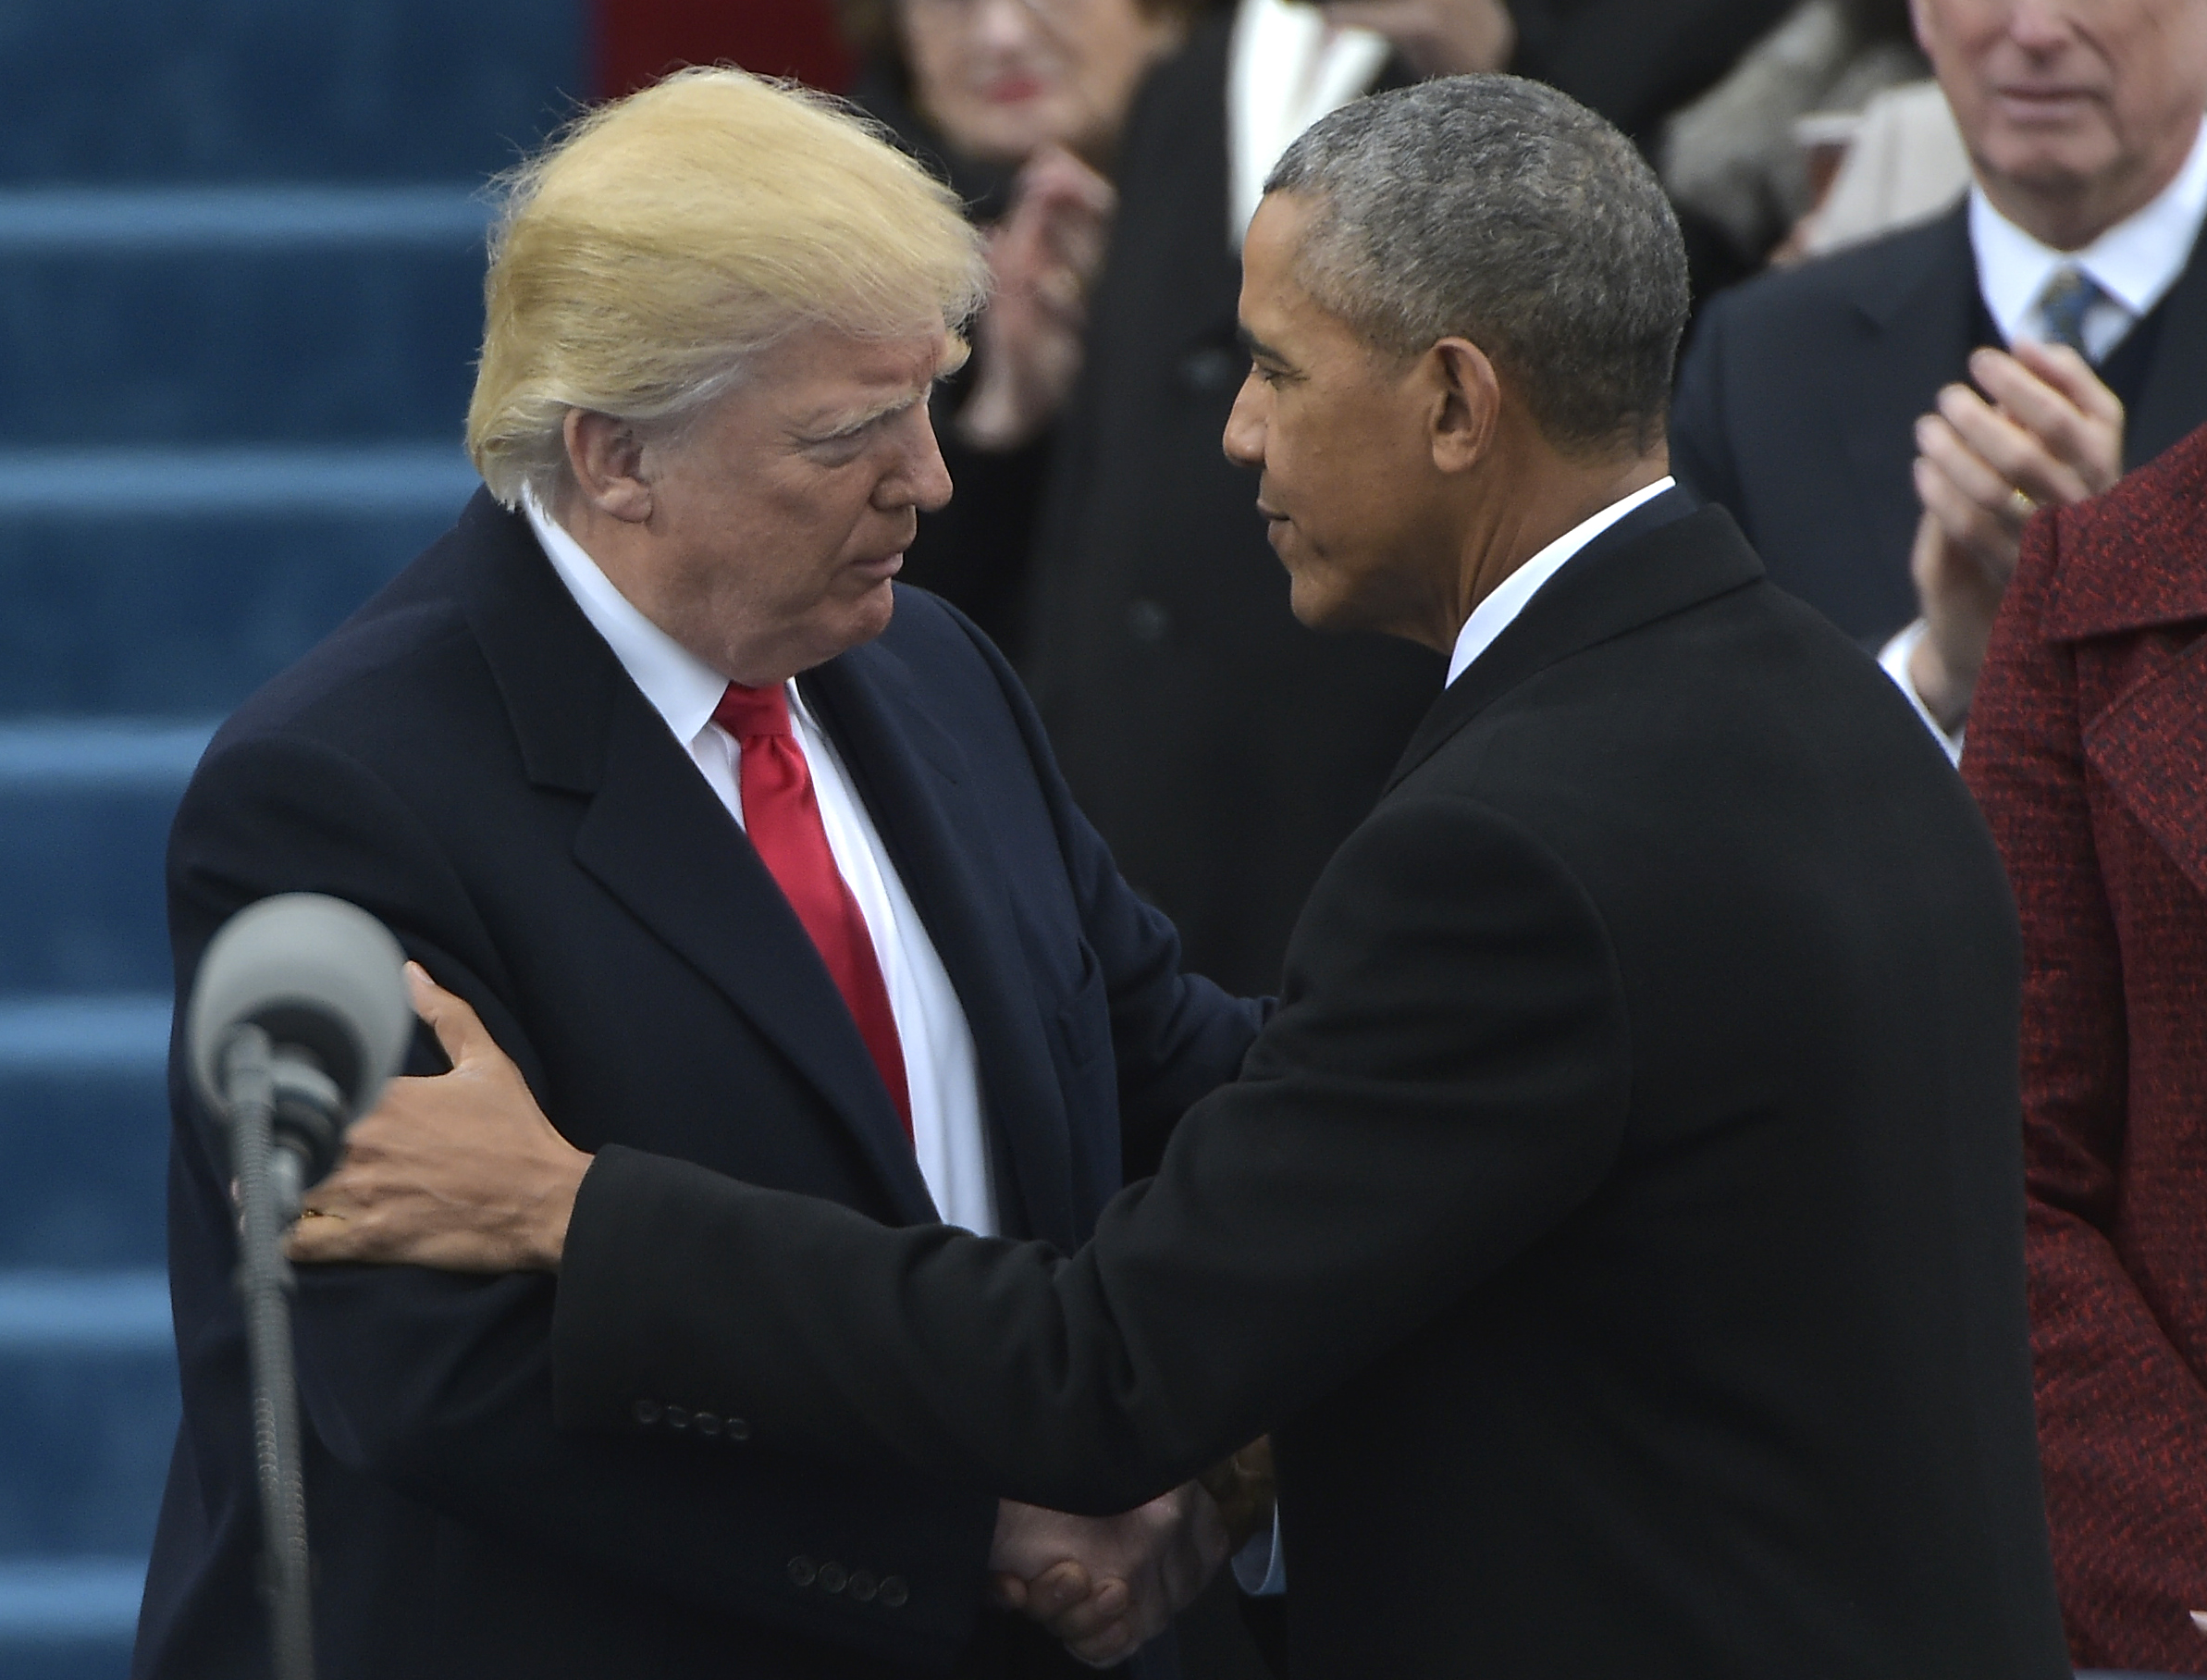 US President Barack Obama (R) greets President-elect Donald Trump as he arrives on the platform at the US Capitol in Washington, DC, on January 20, 2017, before his swearing-in ceremony. / AFP PHOTO / Mandel NGAN